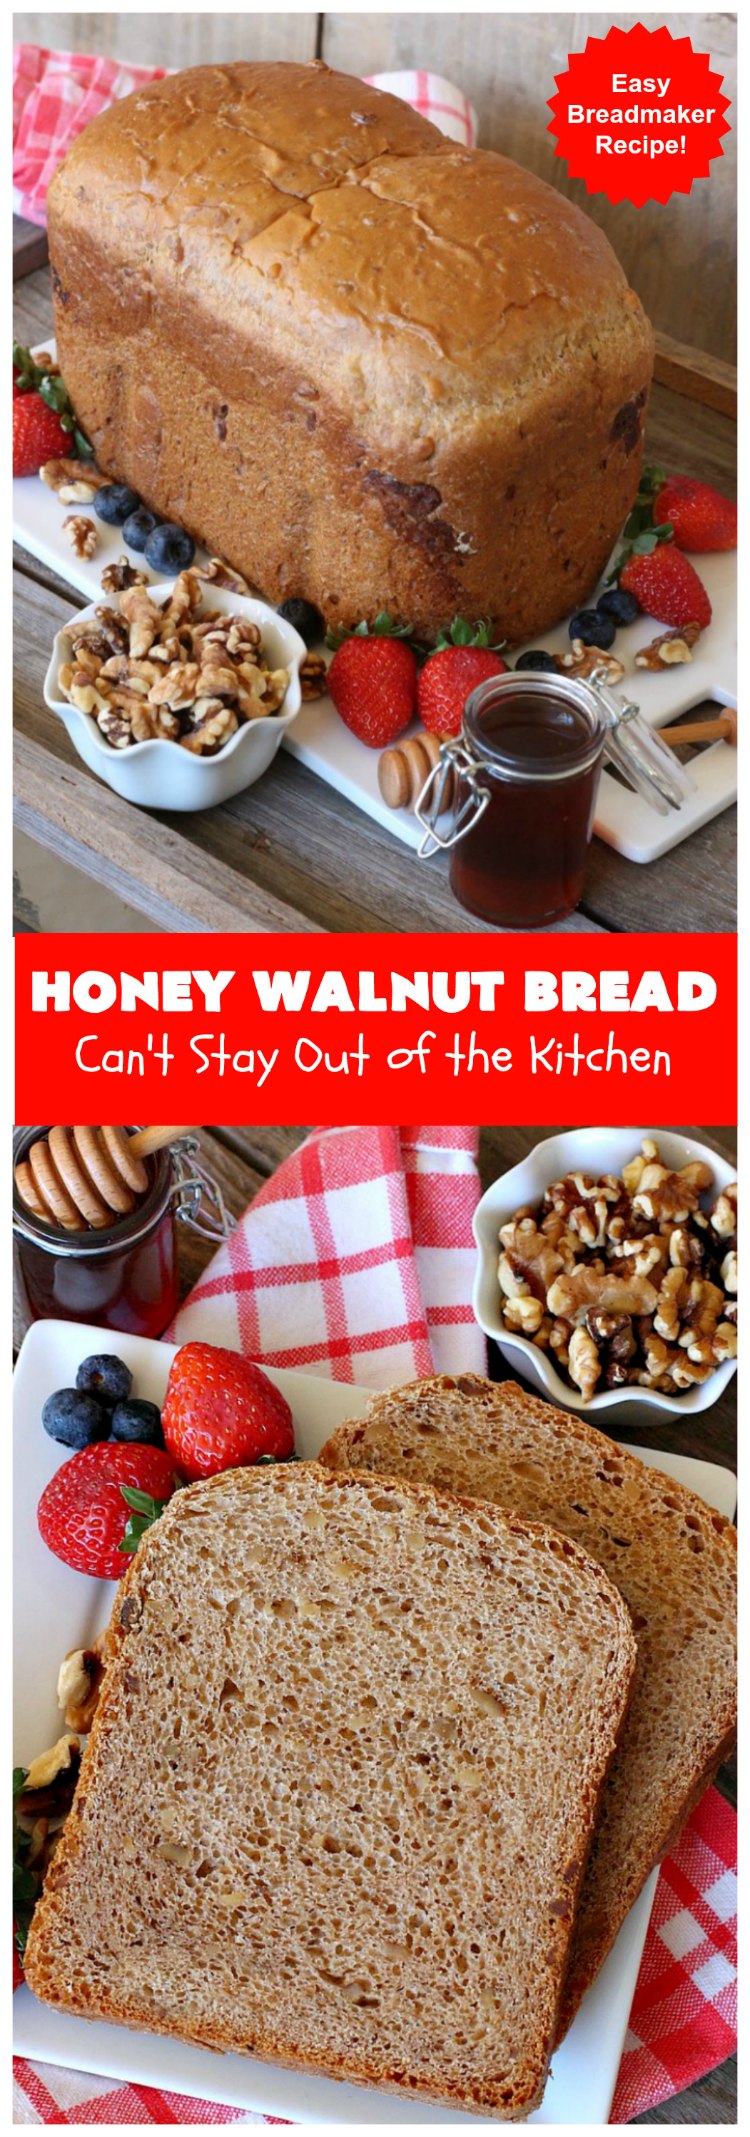 Honey Walnut Bread | Can't Stay Out of the Kitchen | delicious #HomemadeBread for the #Breadmaker!  Made with #walnuts & #honey. Great for #breakfast or dinner. #HoneyWalnutBread